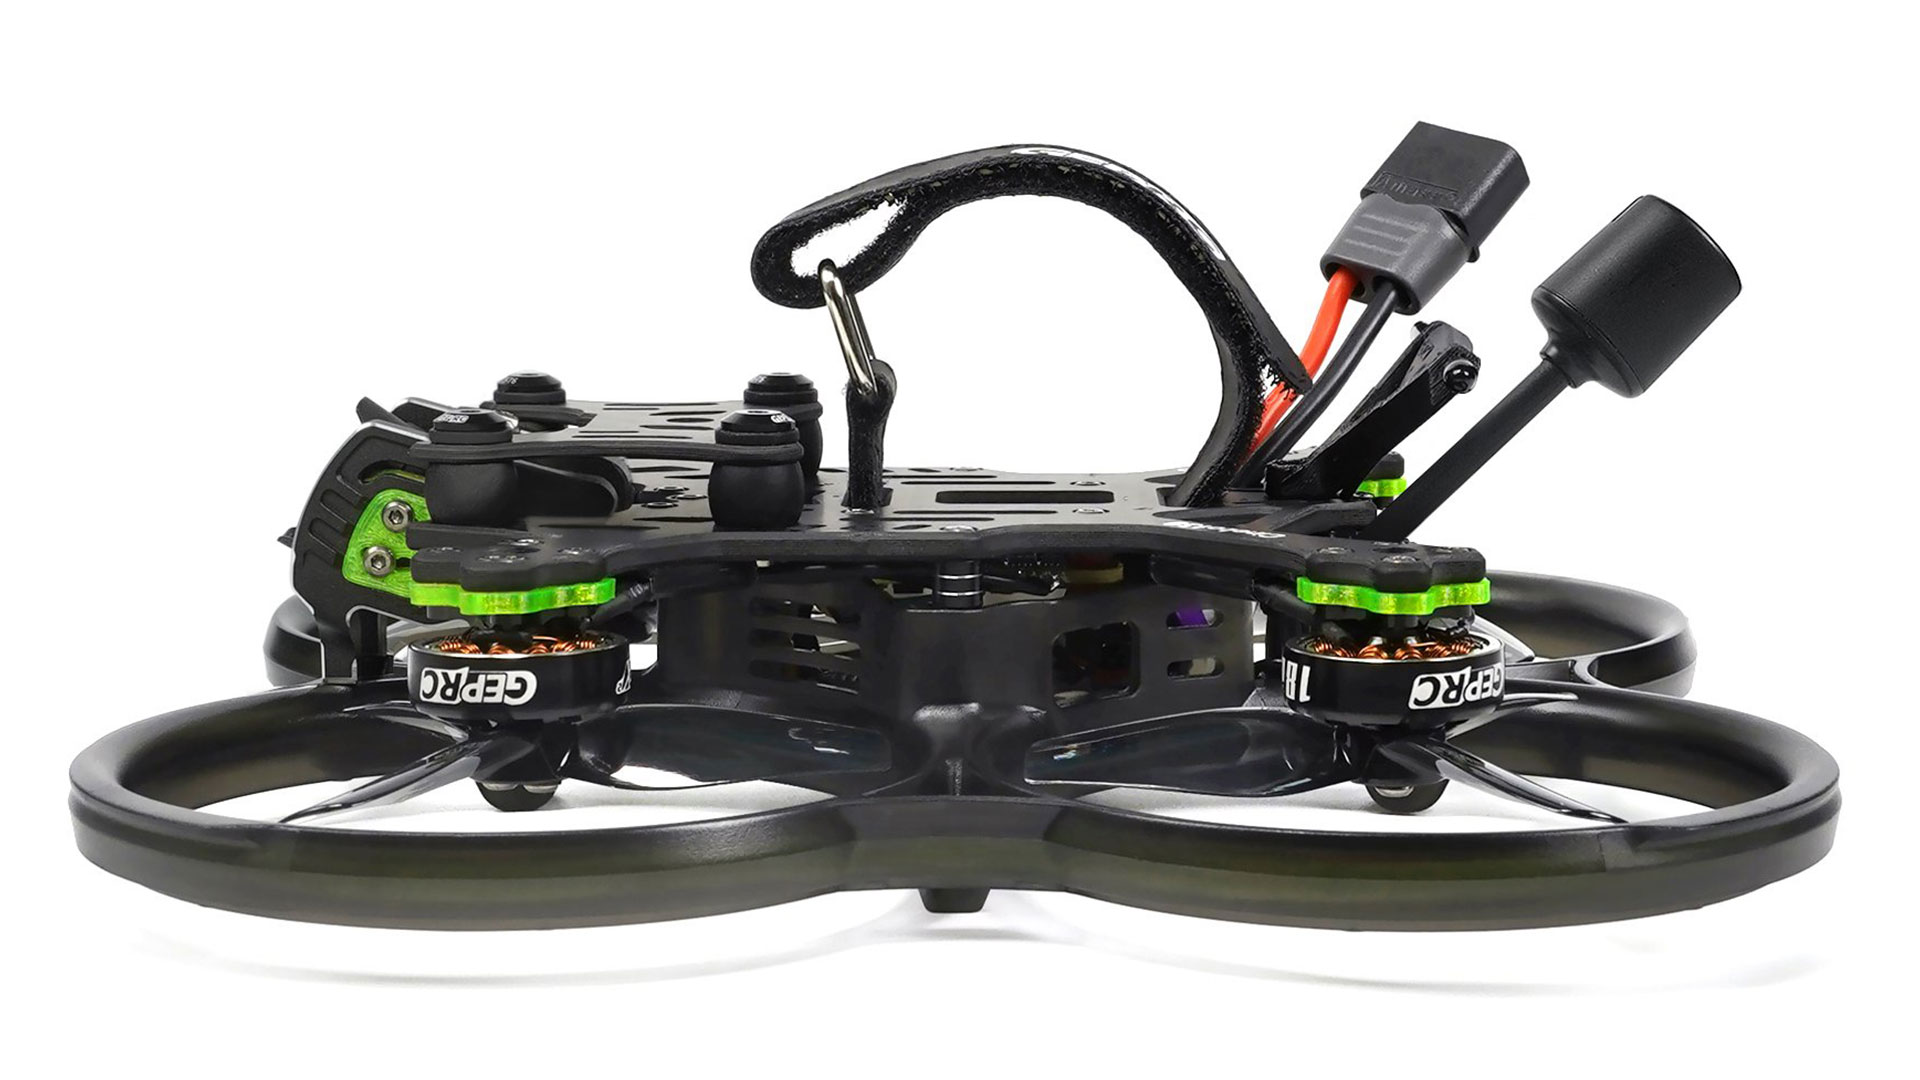 GEPRC Cinebot30 - 3-Inch FPV Drone with DJI O3 Air Unit and Glowing Prop  Guards now Available